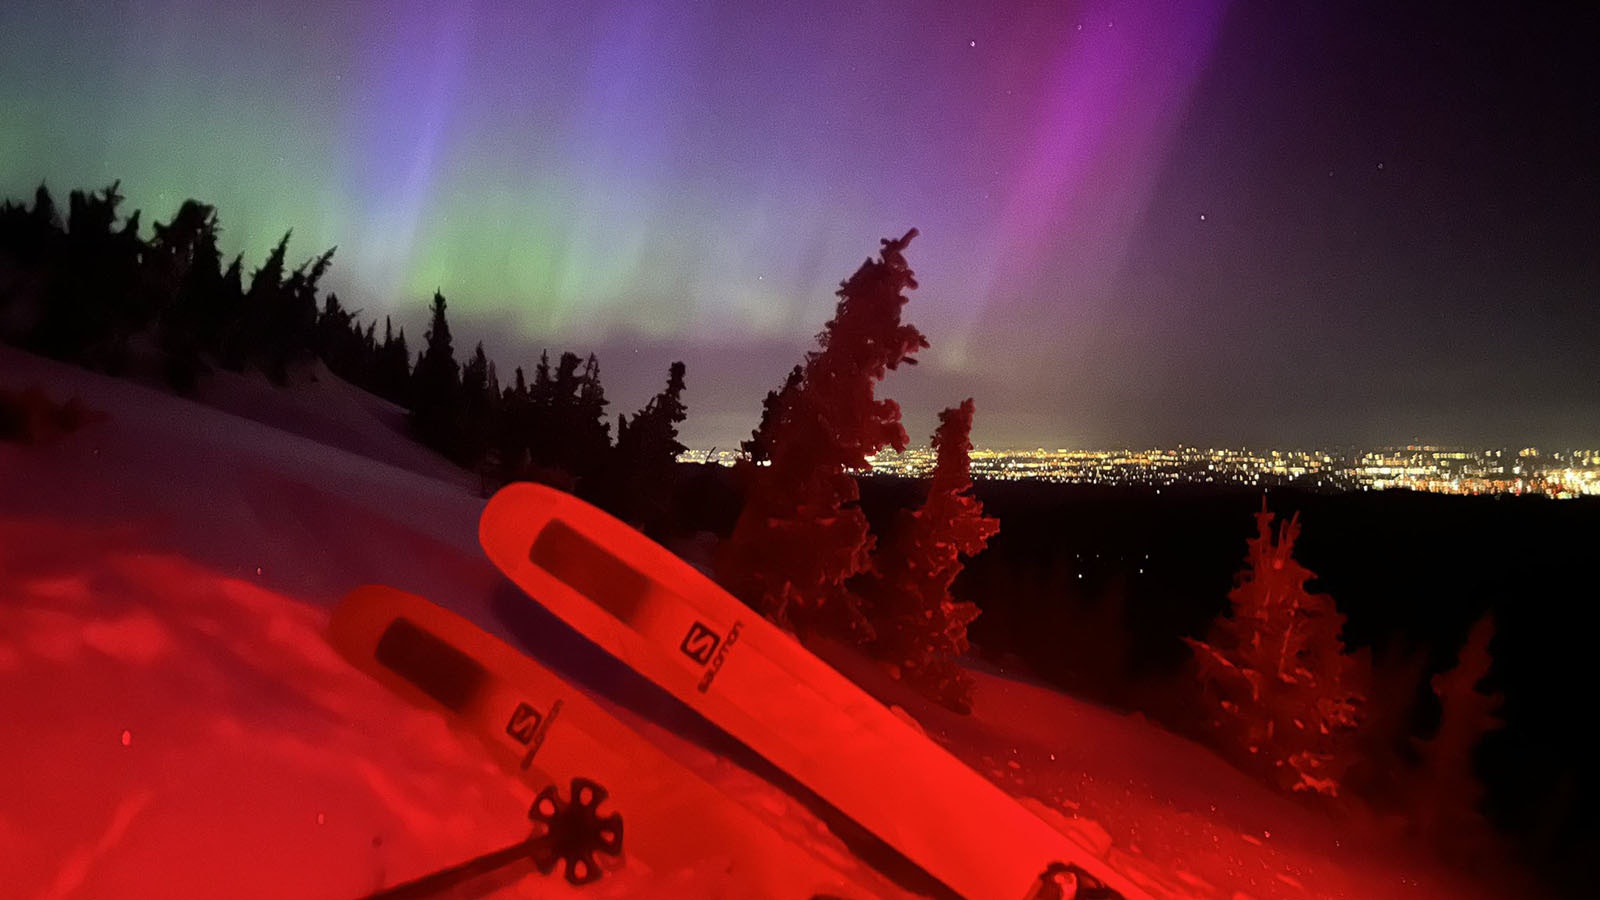 Charnick checks out the northern lights while taking a break from skiing on Friday night.